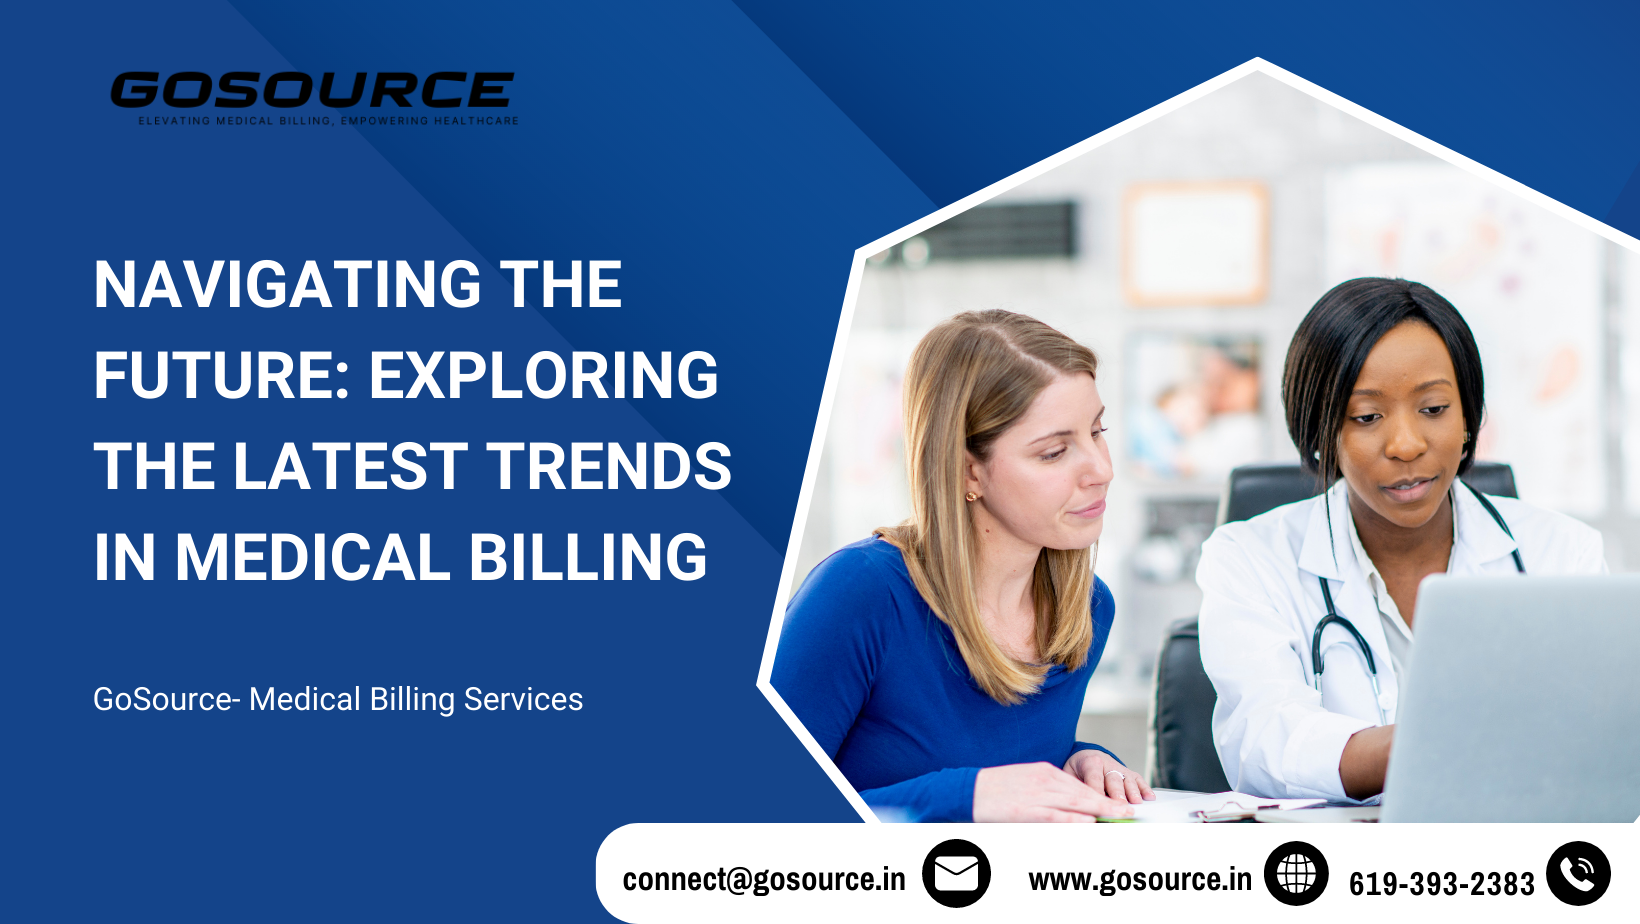 Navigating the Future: Exploring the Latest Trends in Medical Billing